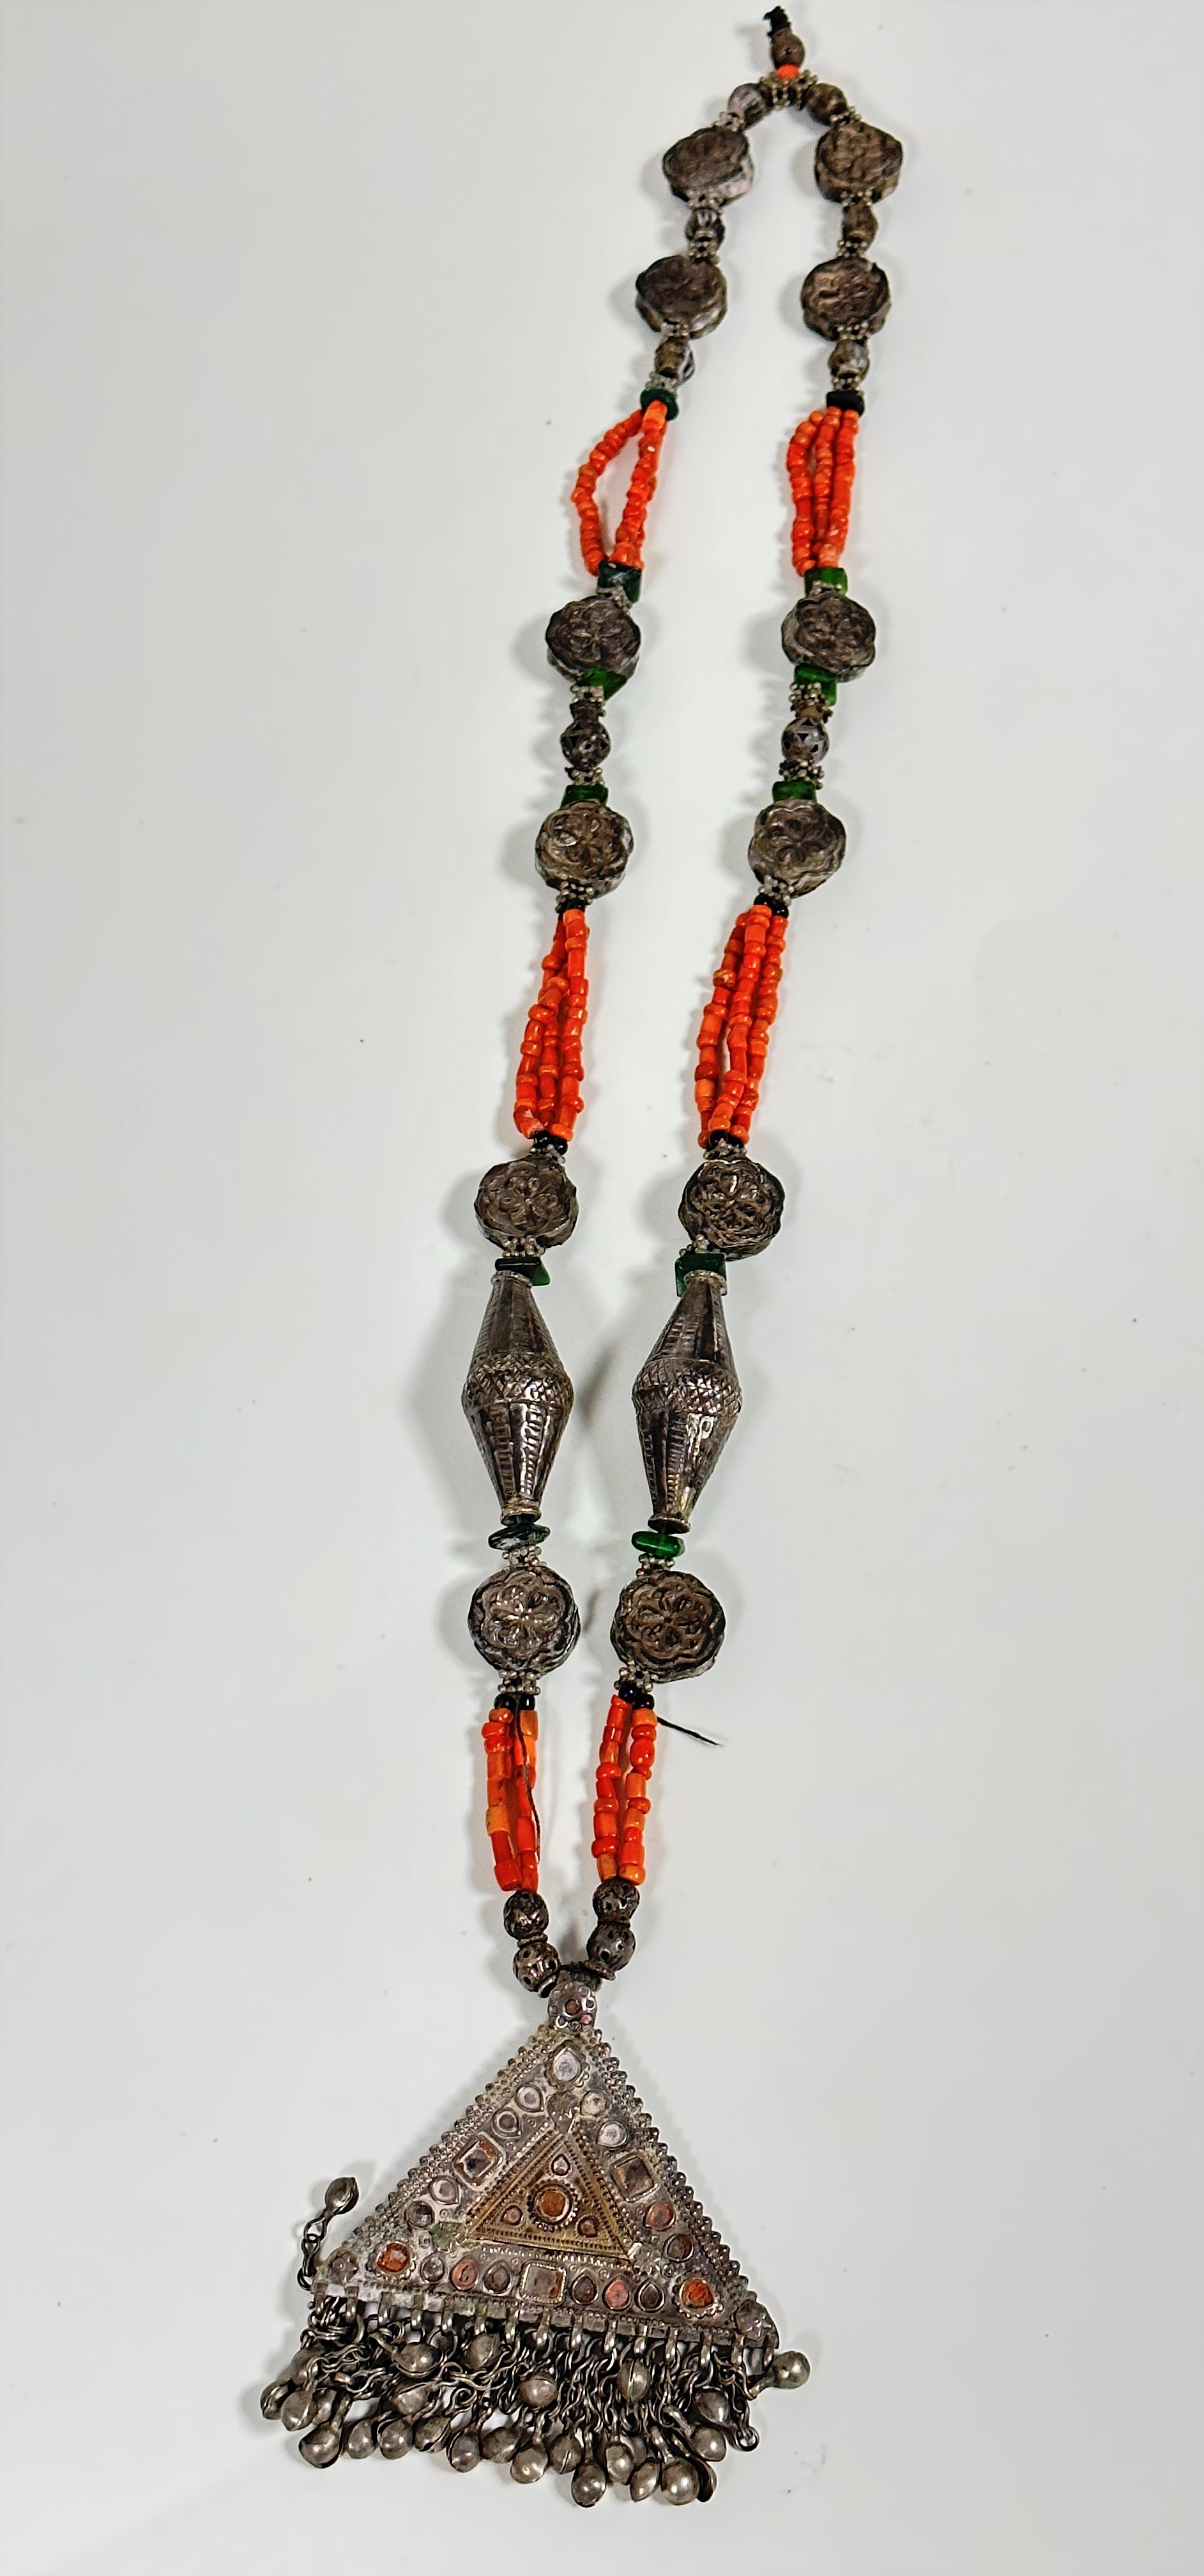 A Middle Eastern necklace set white metal discs and green glass beads, with triple strand pink coral